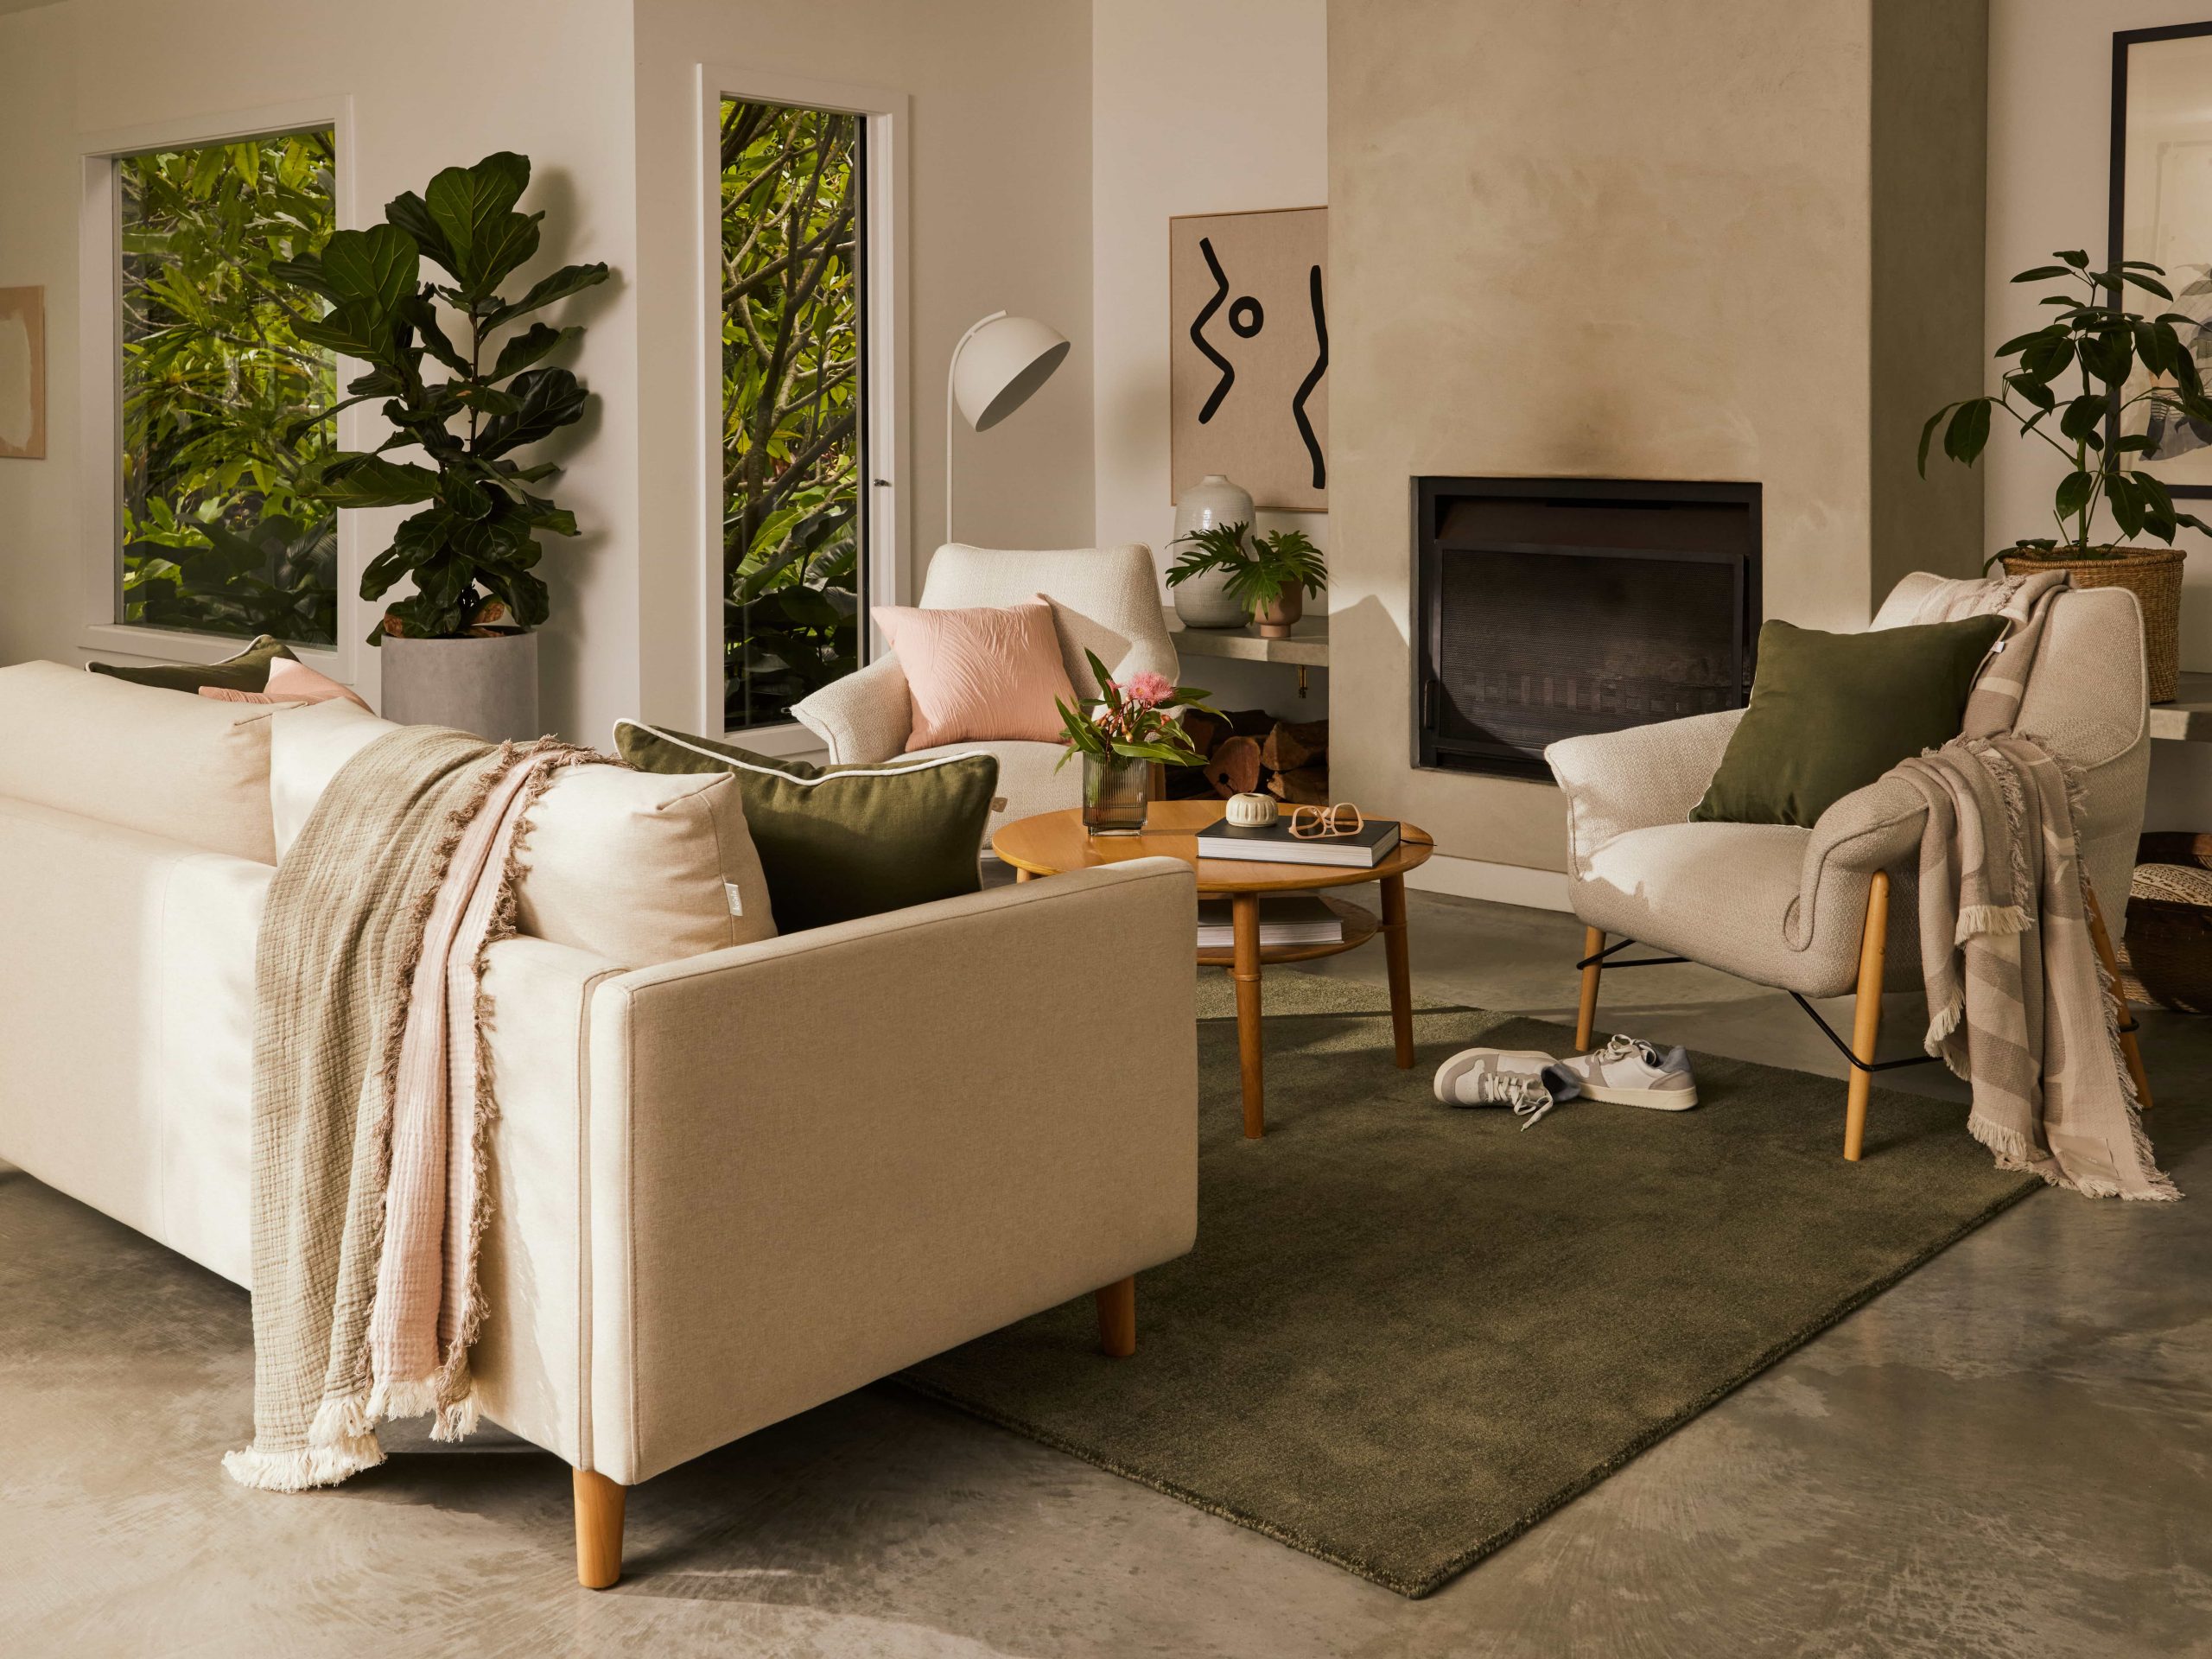 Among the must have furniture for new home, explore our unique range of Cushions, Throws and Rugs